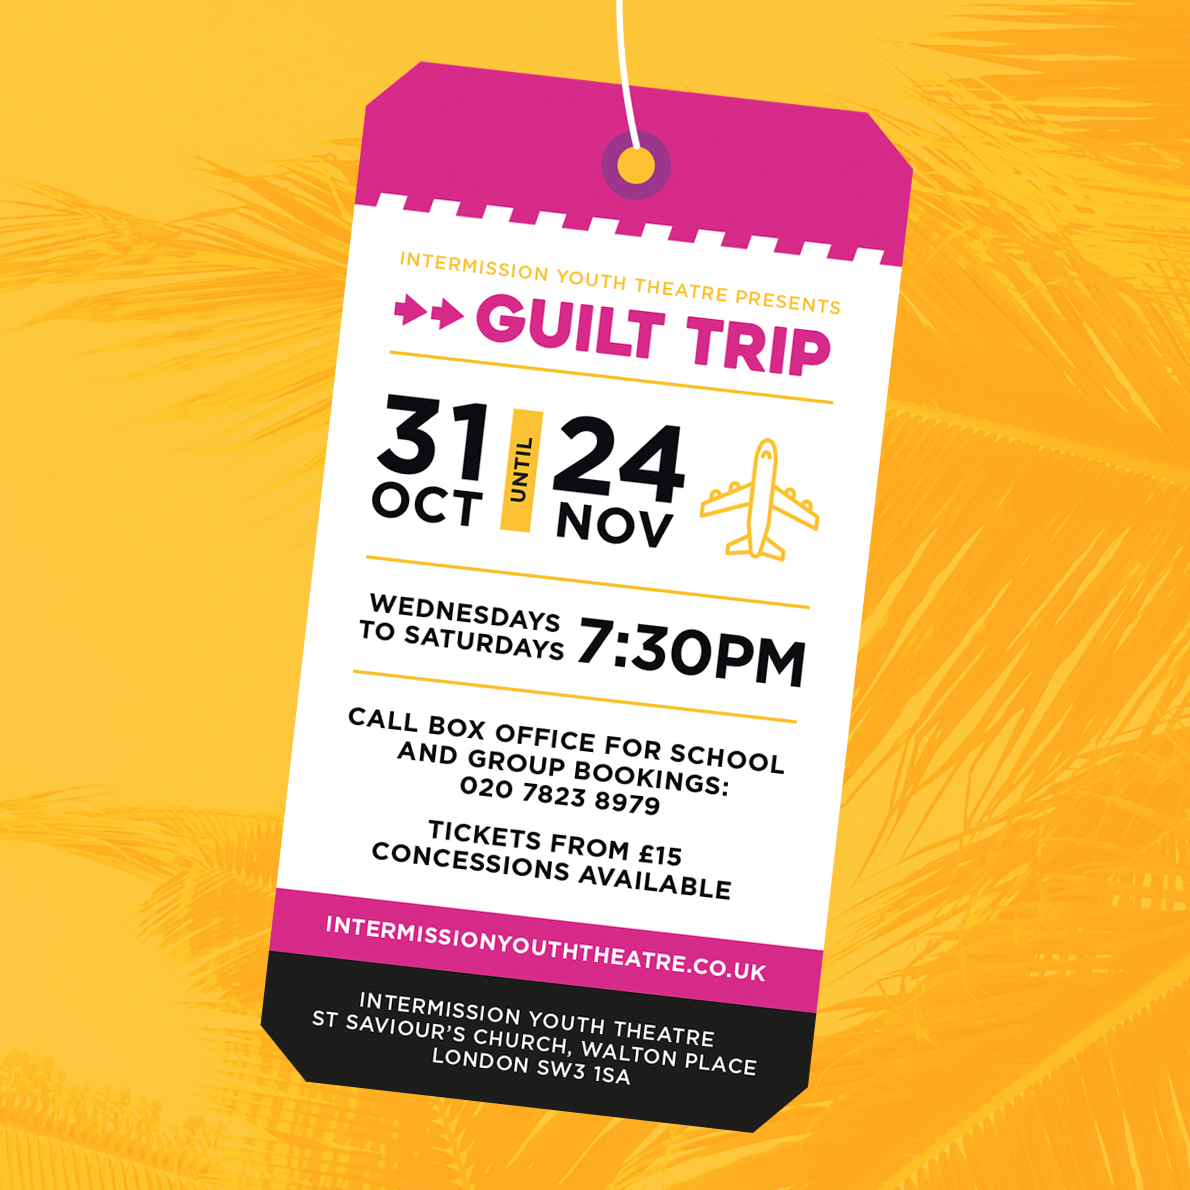 A graphic resembling a boarding pass promoting the Guilt Trip show